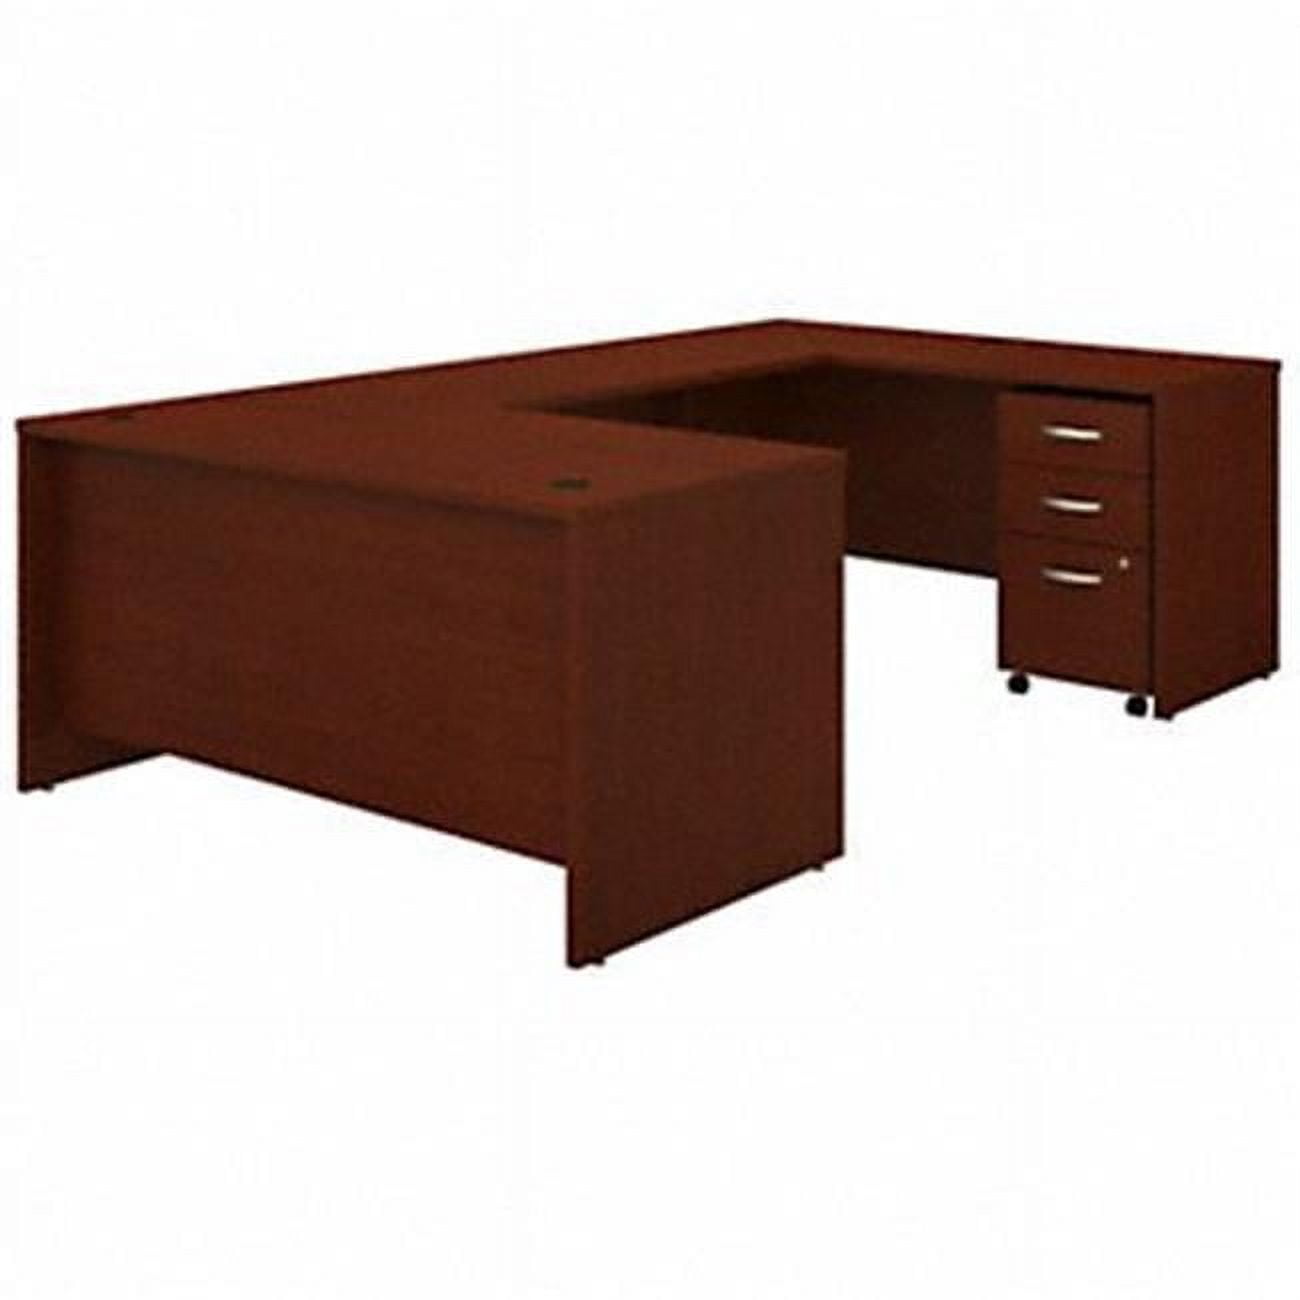 Picture of Bush Business Furniture SRC148MASU 60 in. Series C U Shaped Desk with 3 Drawer Mobile File Cabinet, Mahogany